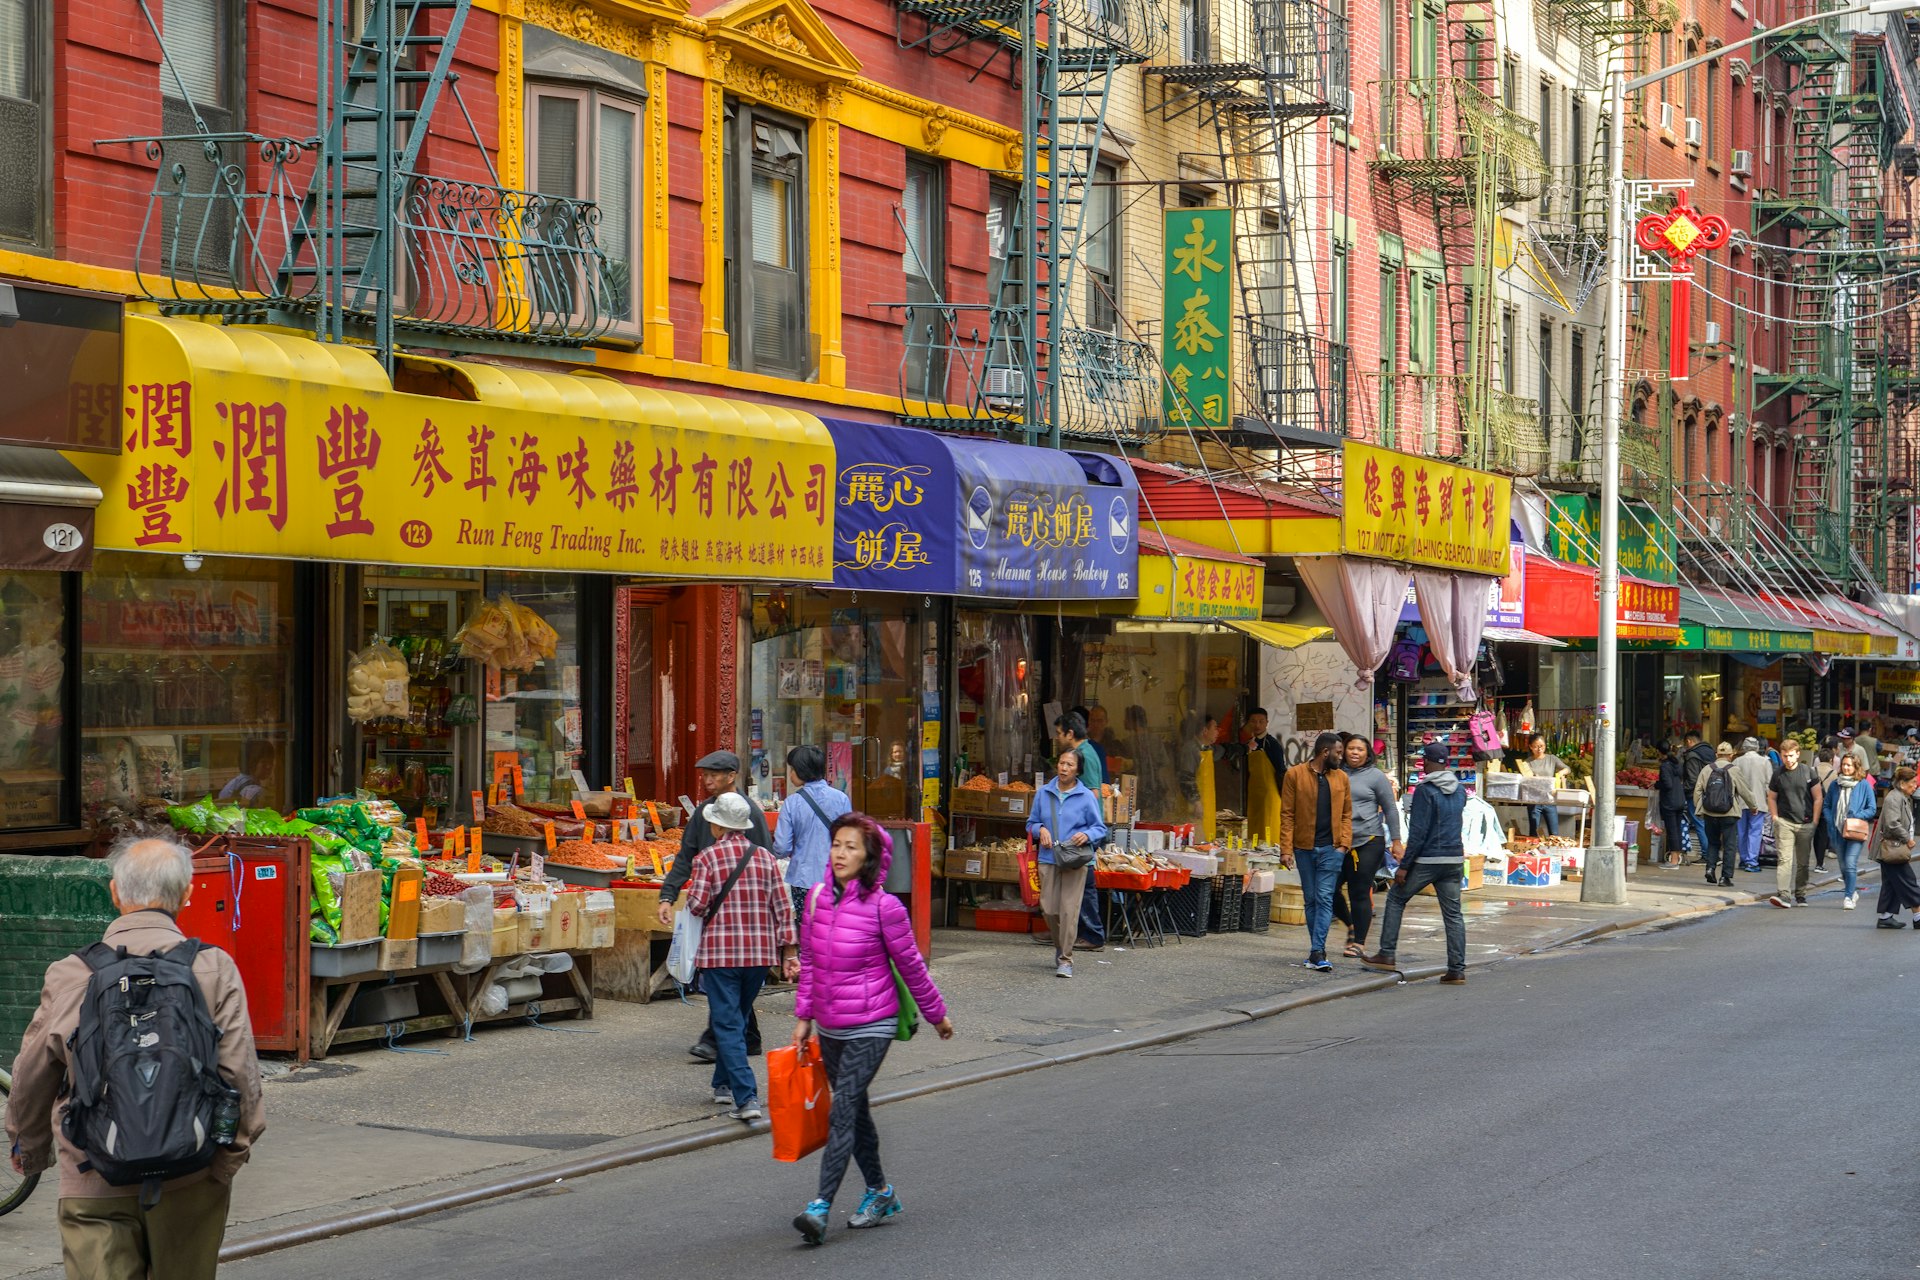 People walking past colorful storefronts in the Chinatown district of Manhattan